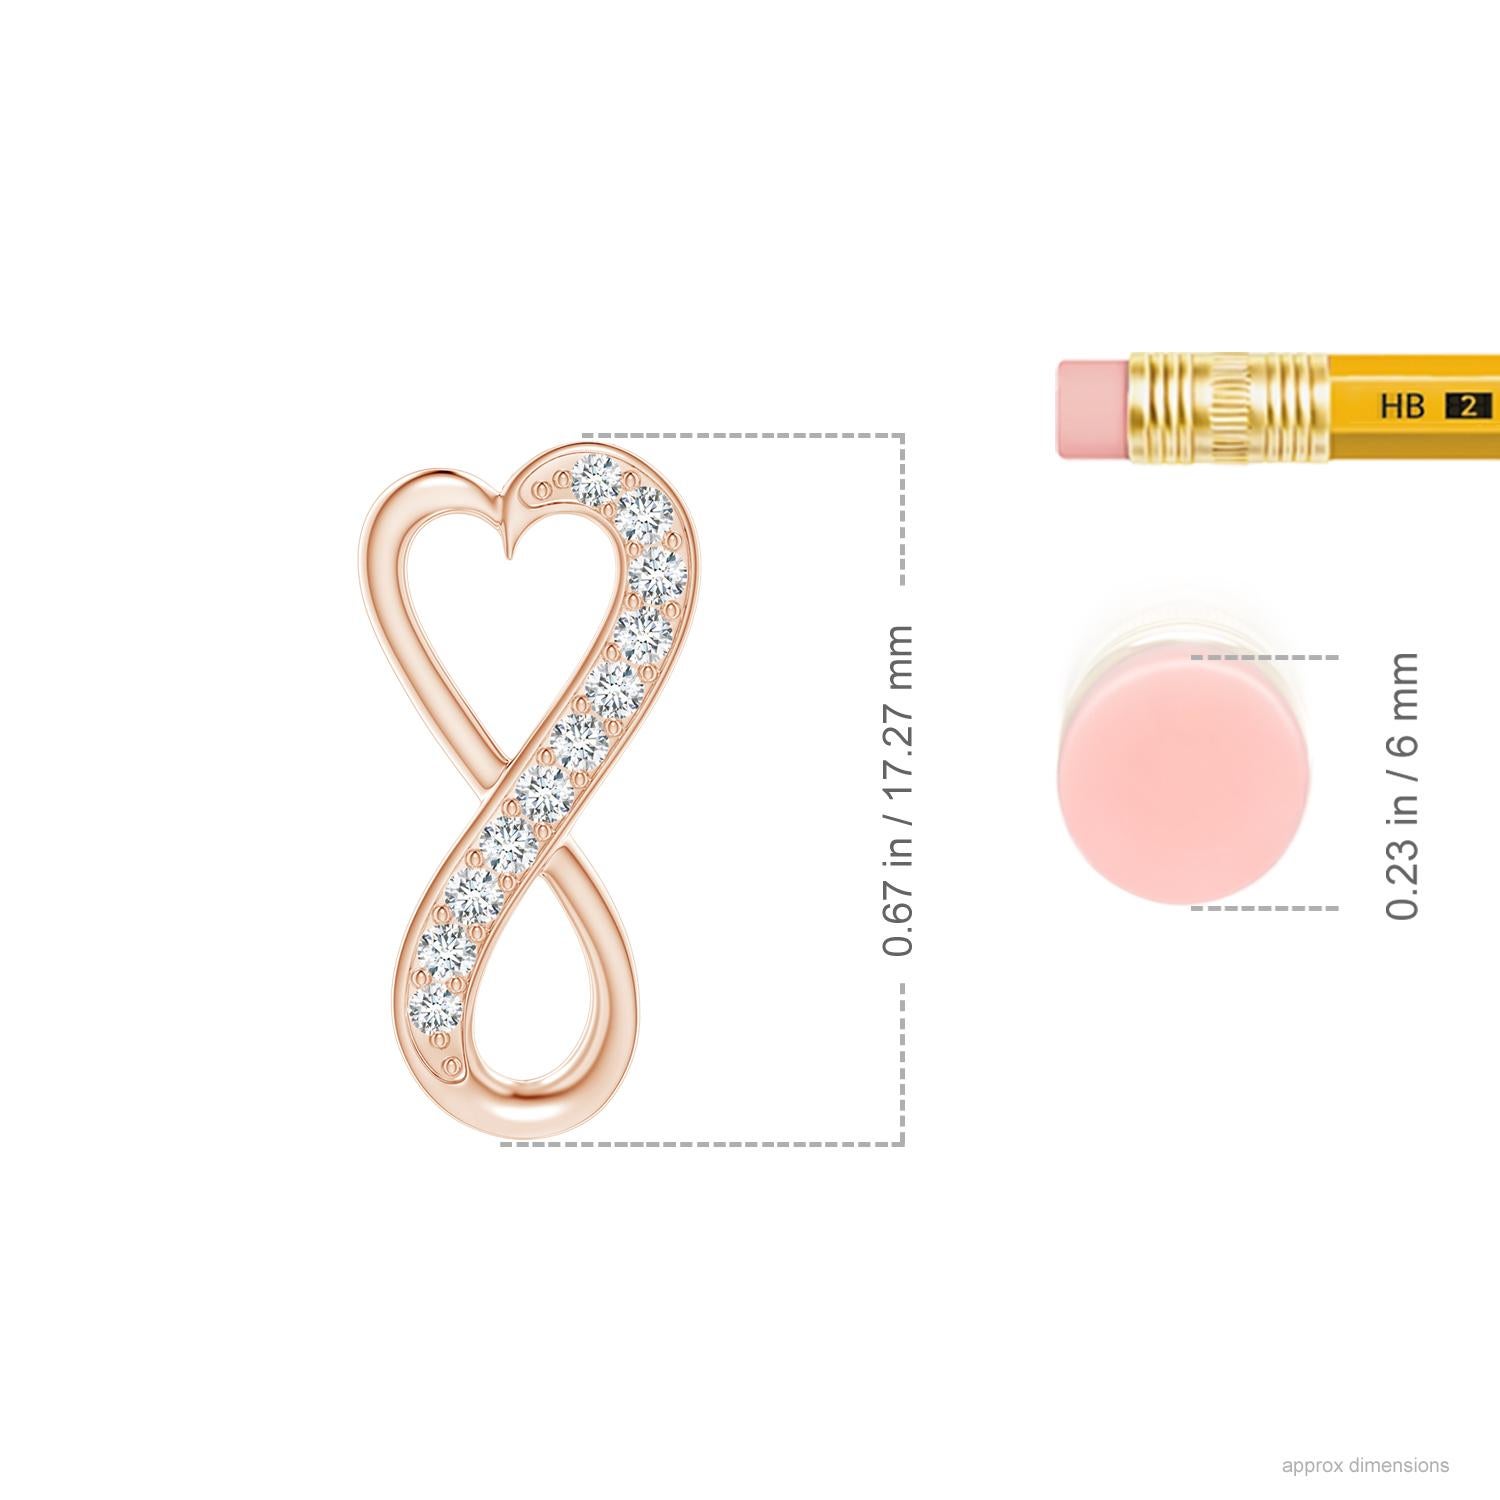 Designed with a hidden bale, this contemporary pendant features a heart frame that extends to form a stunning infinity. Shimmering diamonds partially accentuate the curves of this infinity heart pendant. It is skillfully crafted in 14k rose